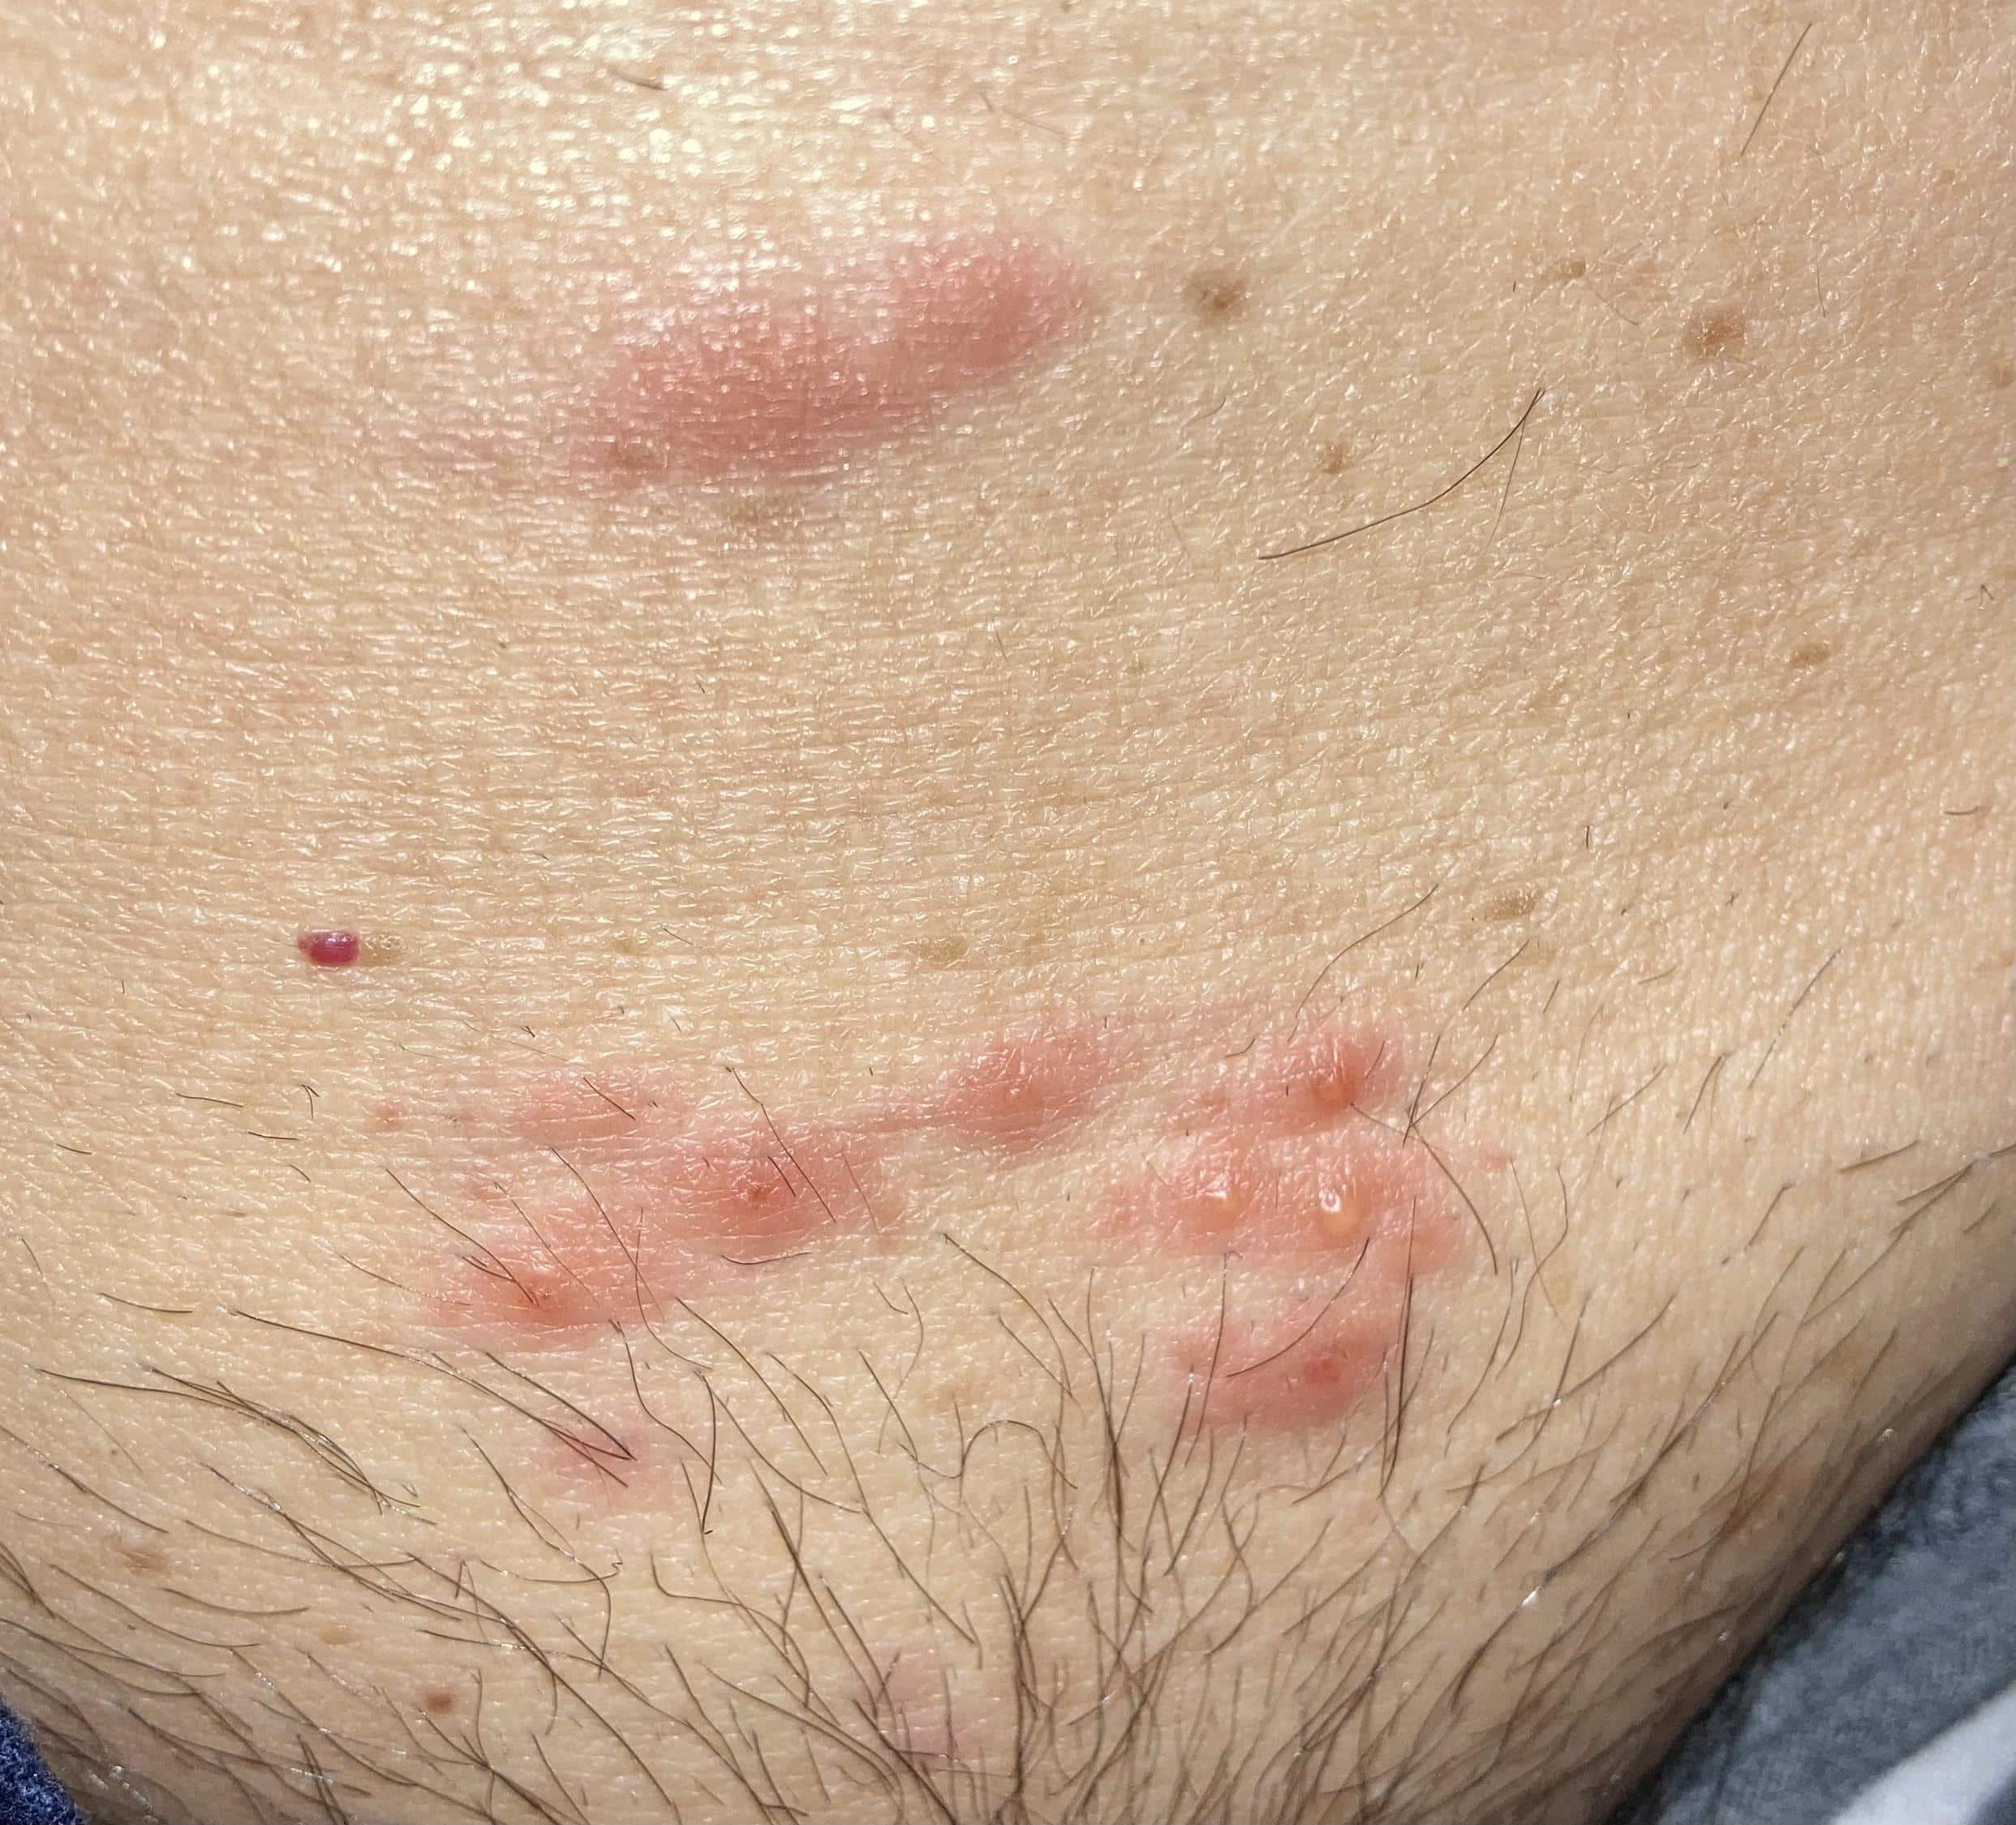 Is this shingles? A little itchy/sore. No other symptoms. : medical_advice